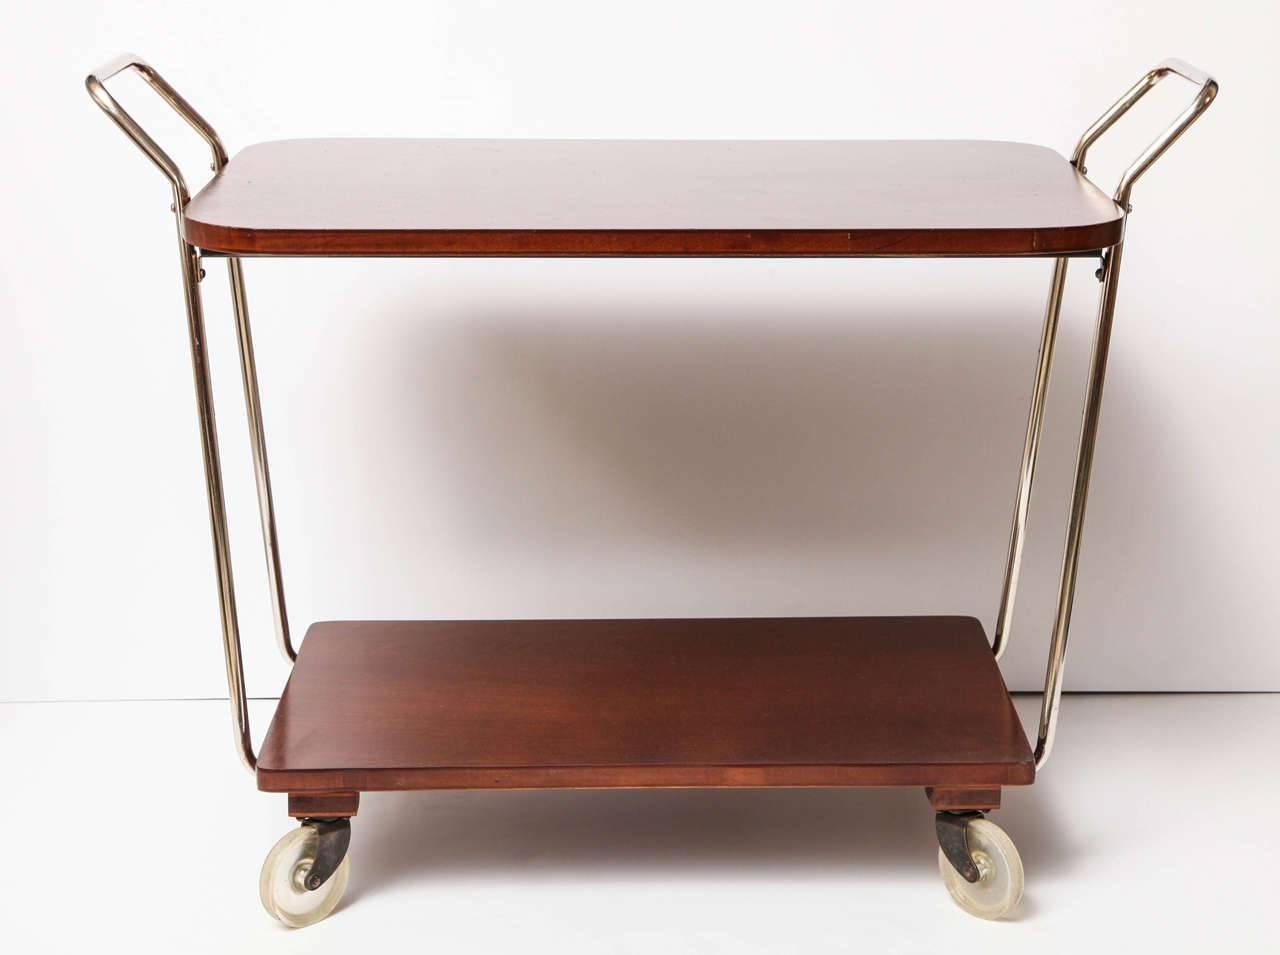 Mid-century modern bar cart, circa 1950. Wood with chrome details. The wood has been refinished and the chrome has been polished.